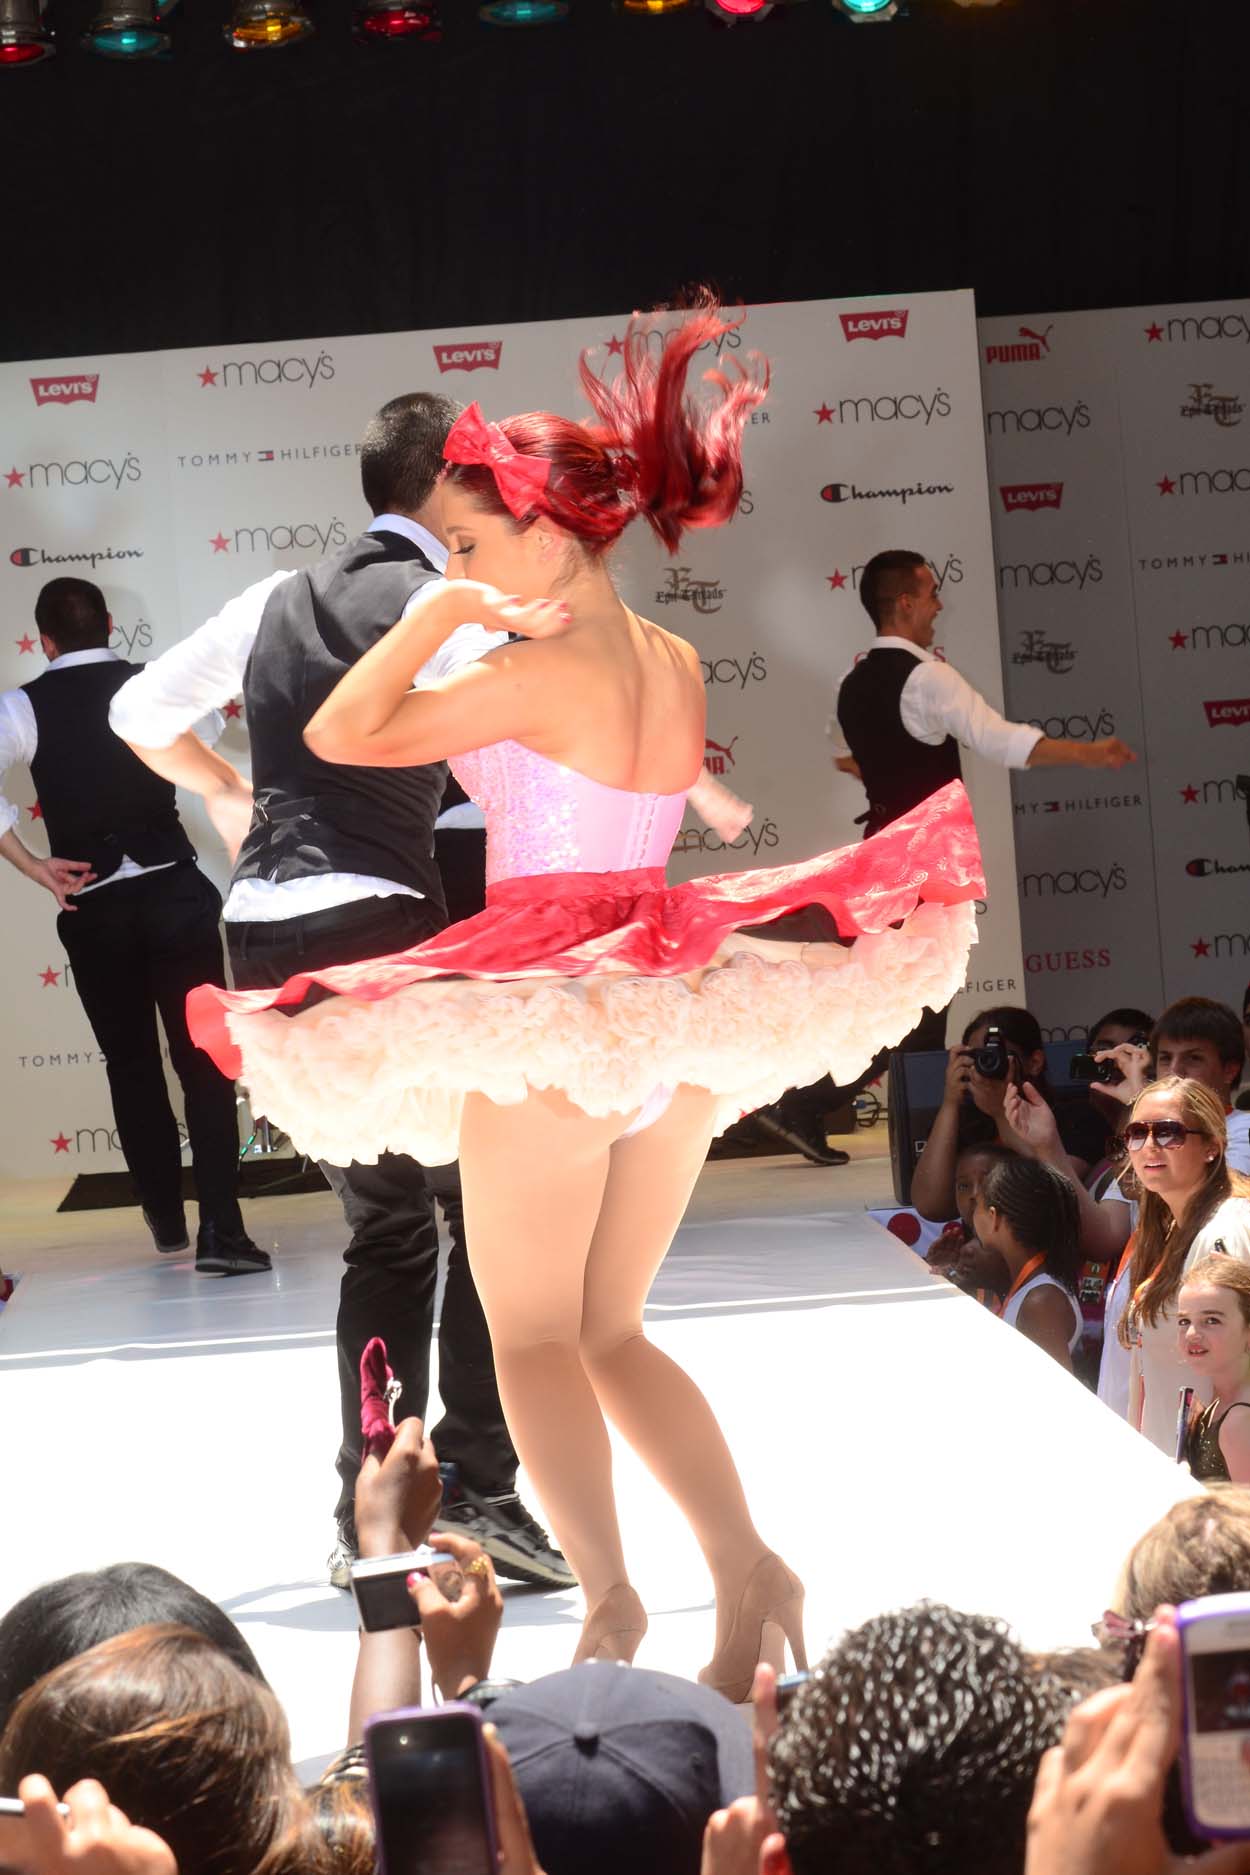 Ariana Grande performing at Macy's Annual Summer Blowout Show in NYC on July 17, 2011